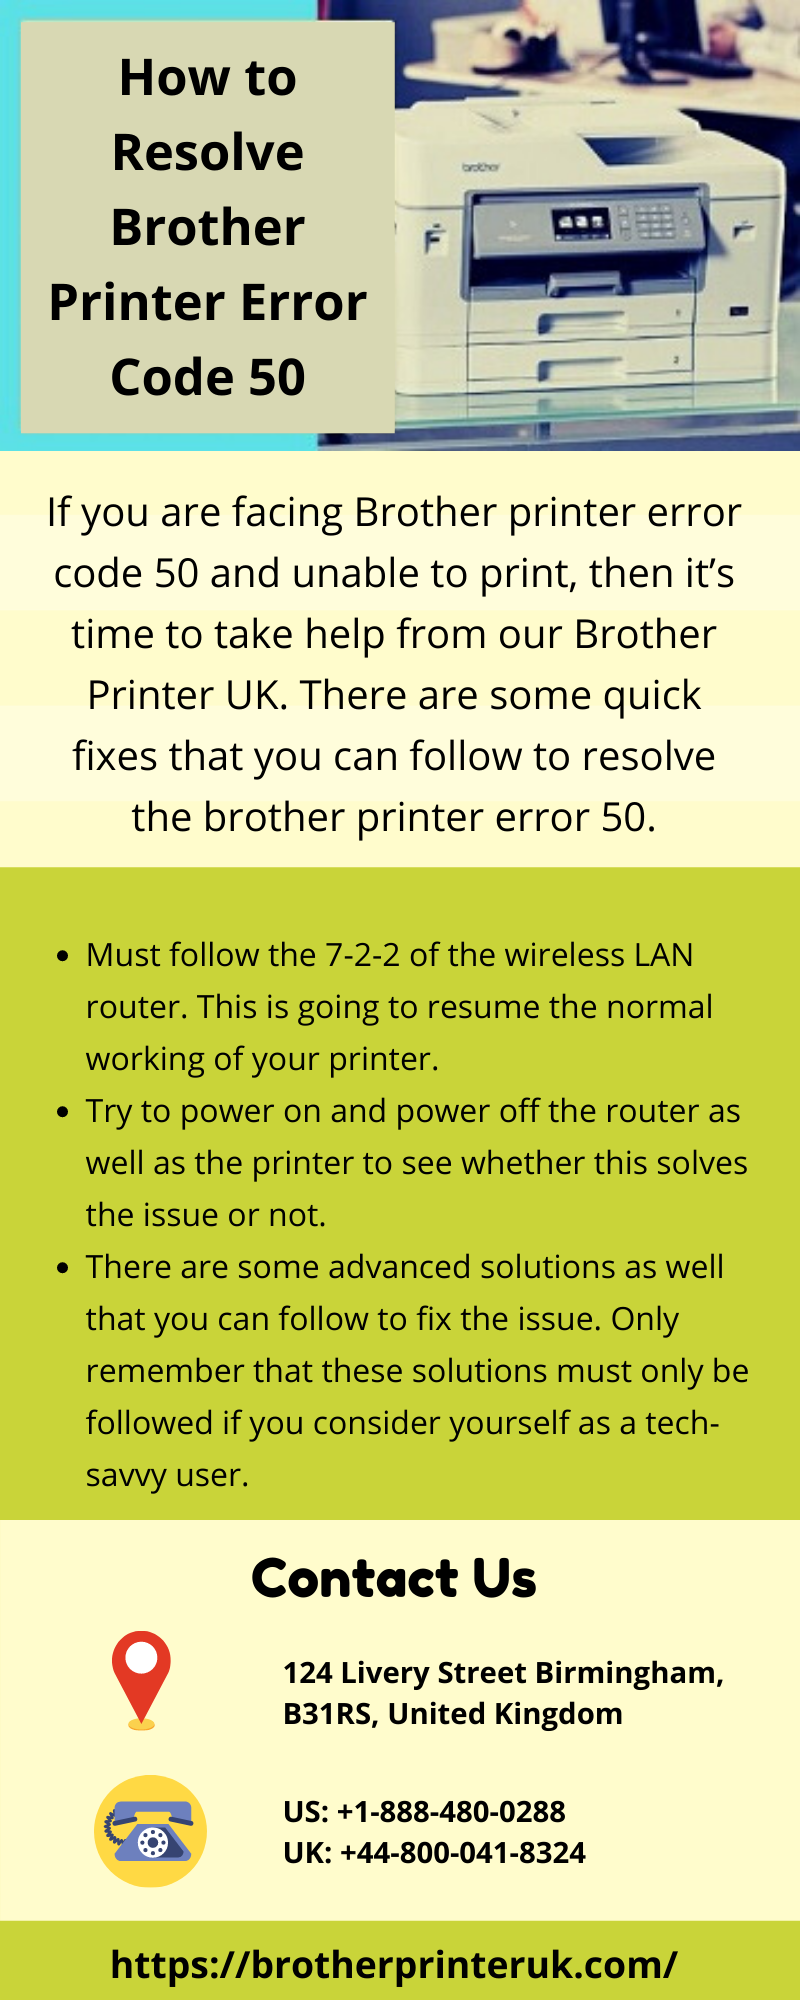 How To Solve Brother Printer Error Code 50 Visually 8367